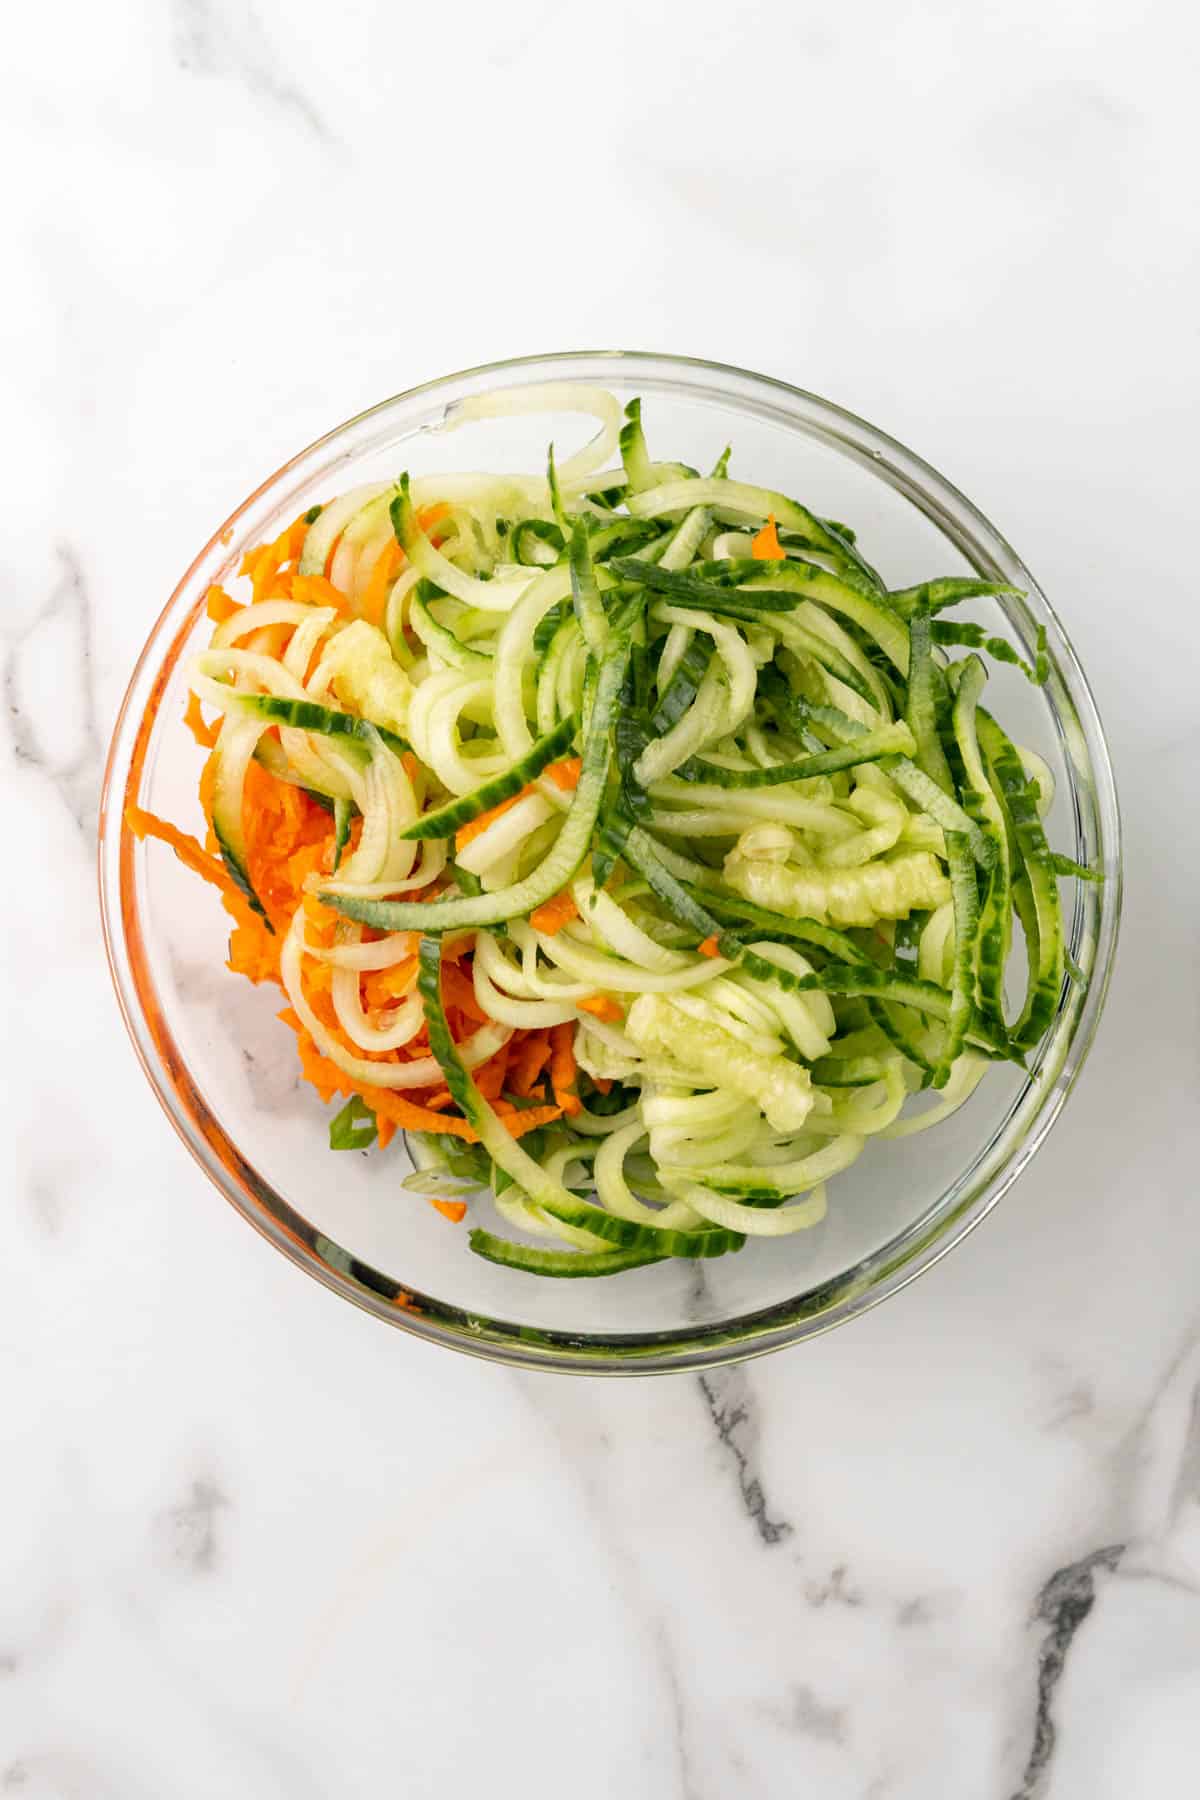 Spiralized veggies added to the glass bowl with the sauce, as seen from above, about to be mixed